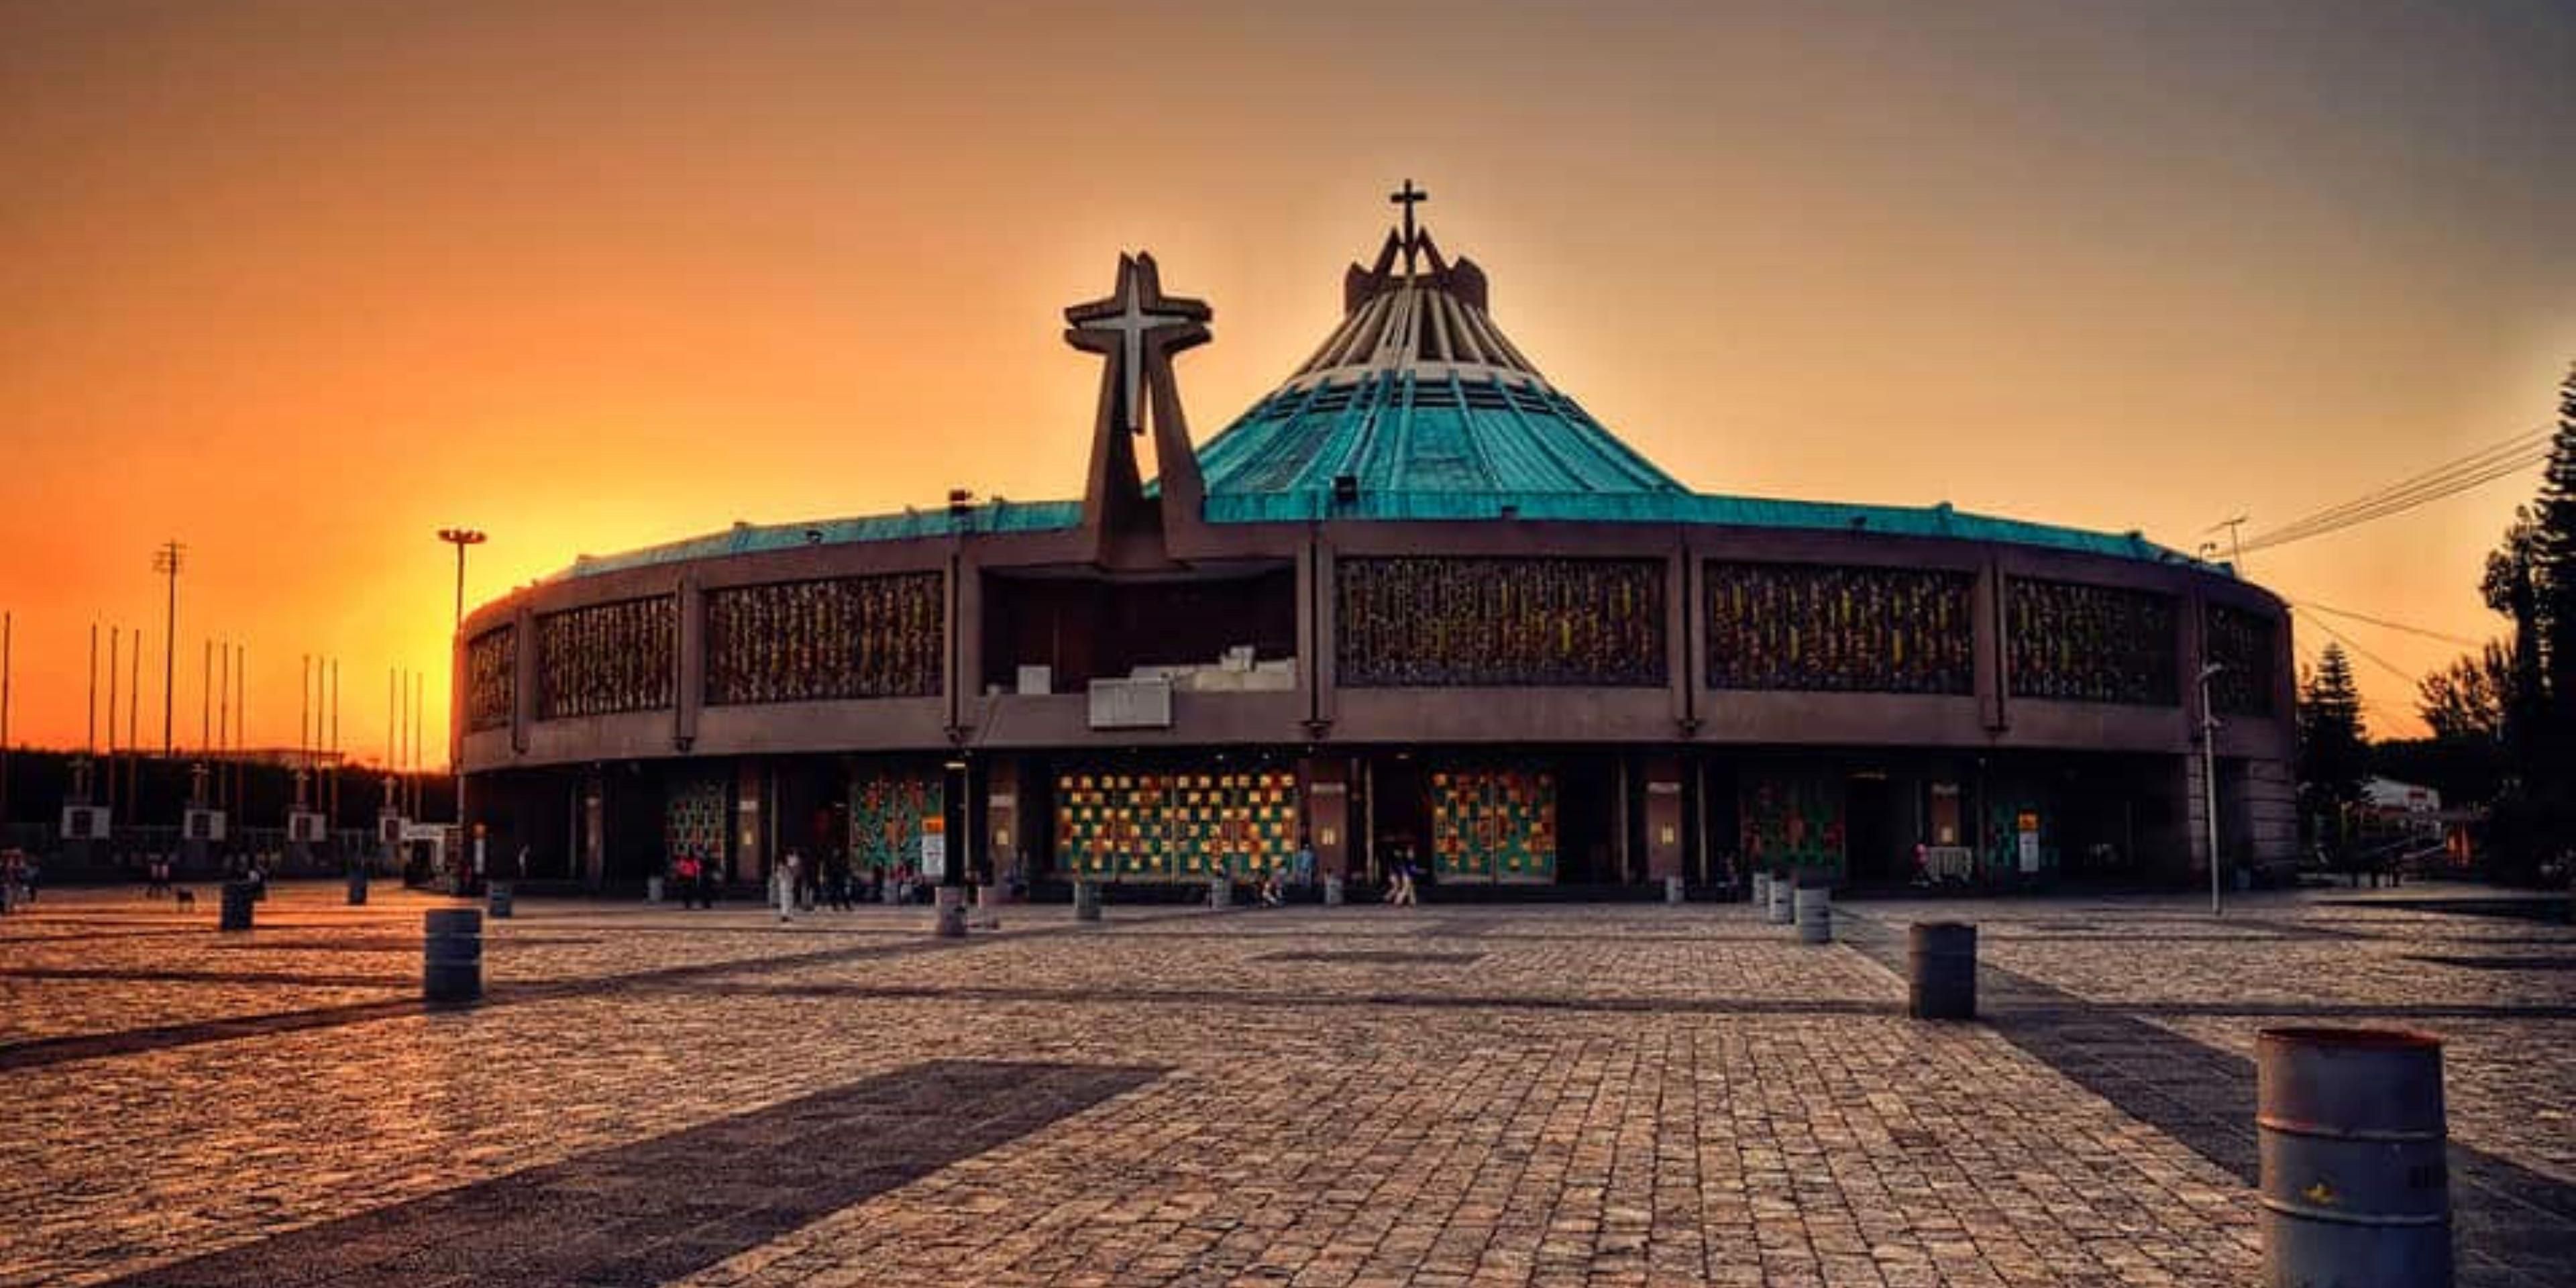 Did you know that we are only 5 minutes from the Basilica of Guadalupe? Don't think twice, stay with us and enjoy the comfort and complimentary breakfast. Book now!